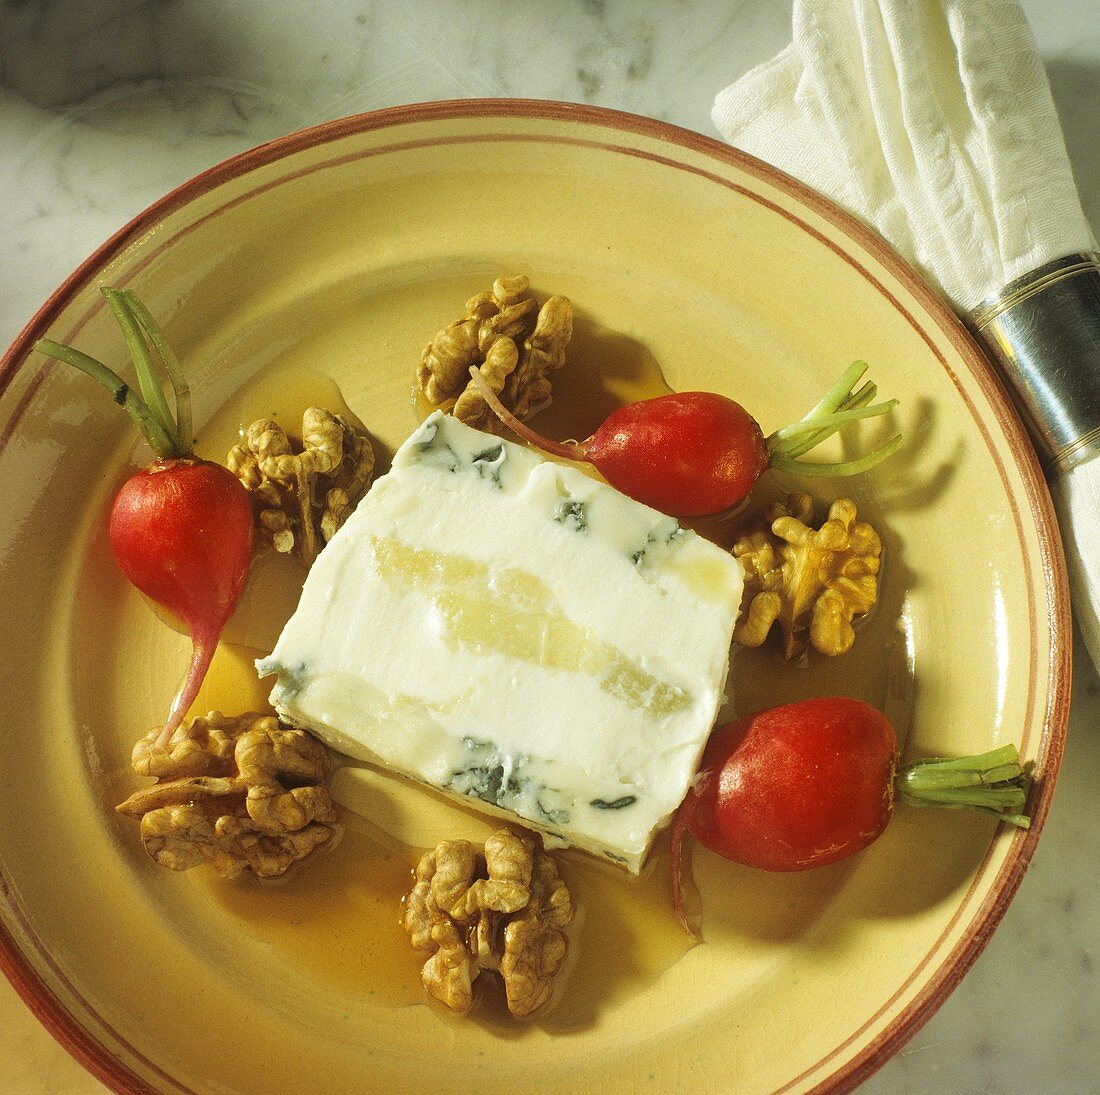 A Slice of Cheese and Pears Terrine with Walnuts and Radishes